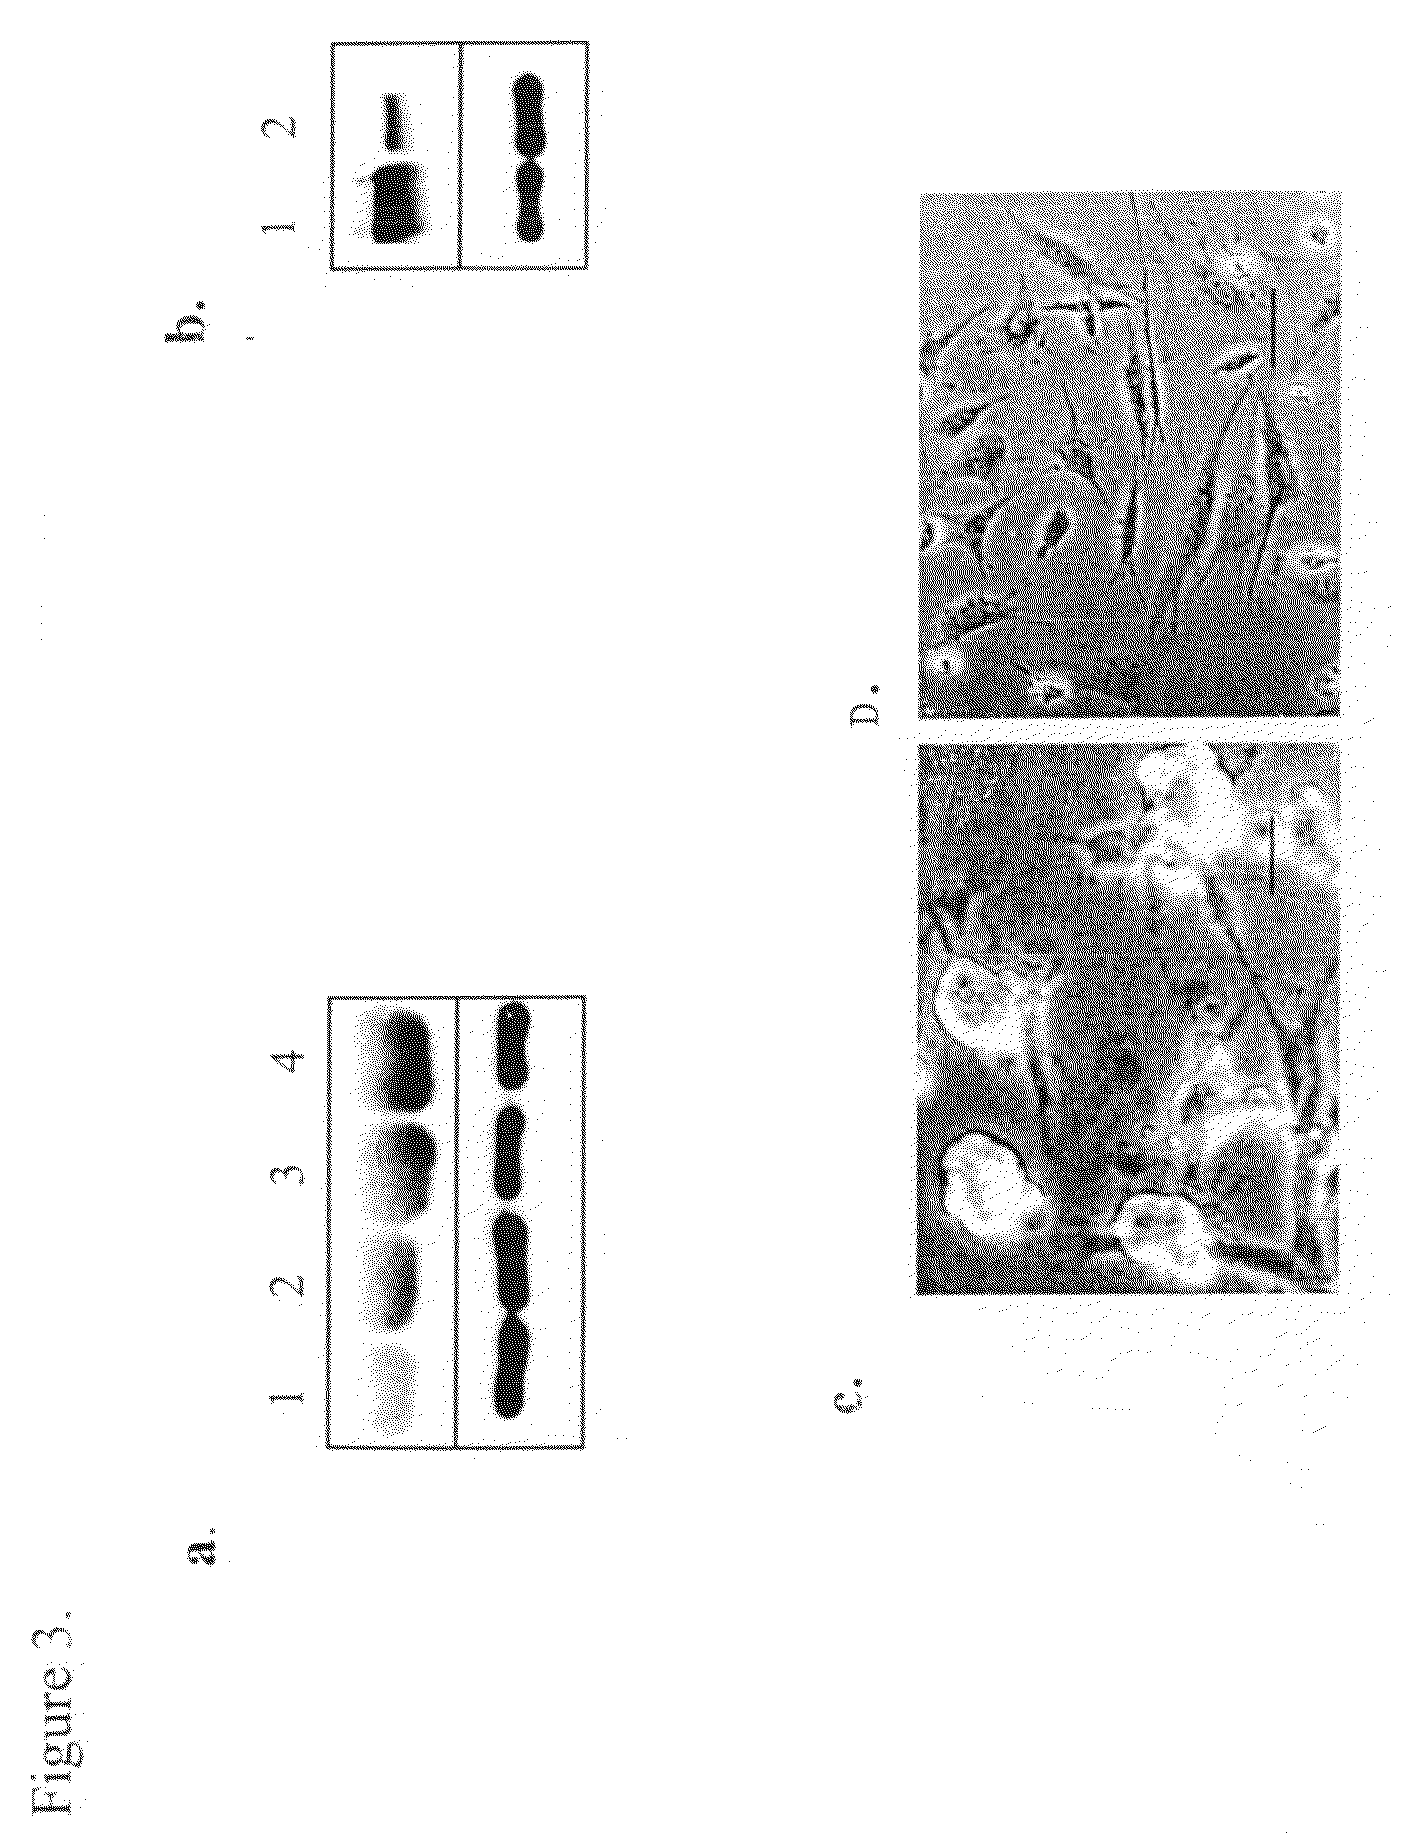 Methods of producing pluripotent stem-like cells